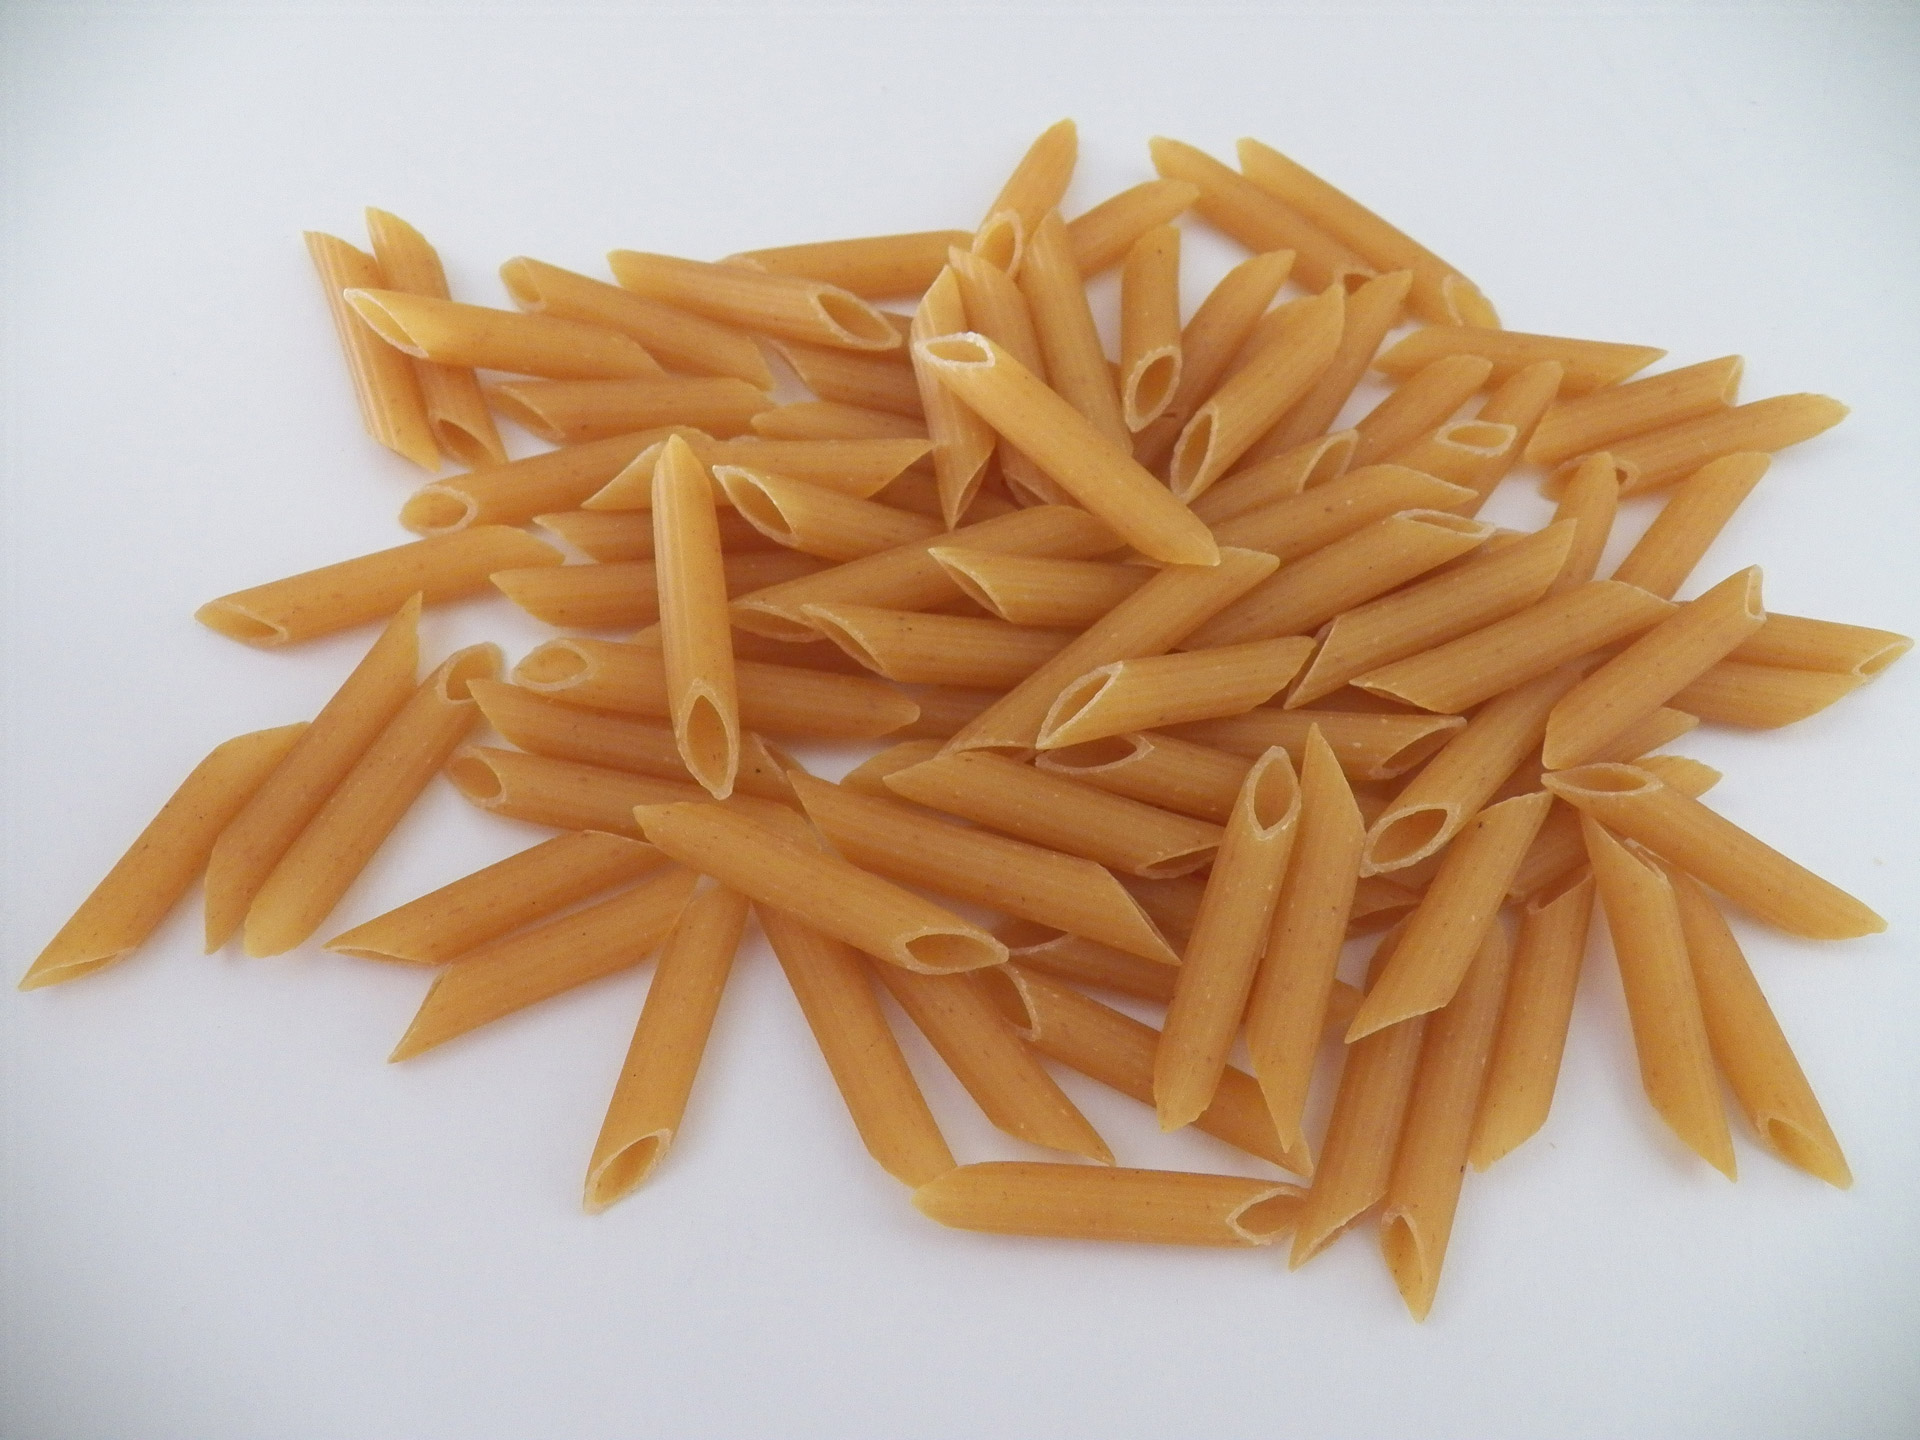 Easy Penne